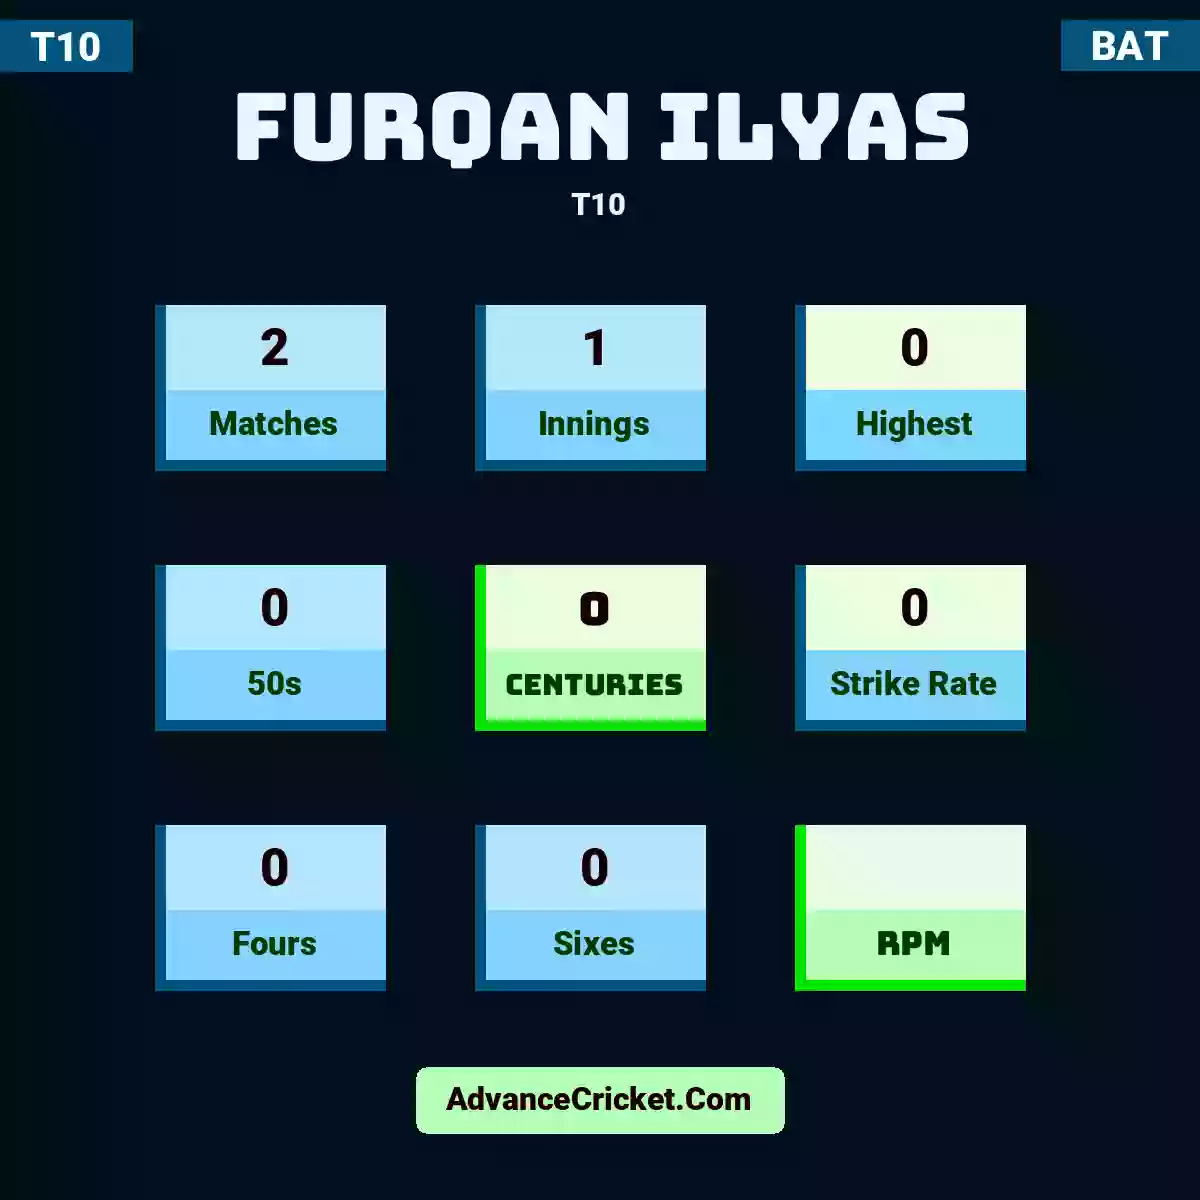 Furqan Ilyas T10 , Furqan Ilyas played 2 matches, scored 0 runs as highest, 0 half-centuries, and 0 centuries, with a strike rate of 0. F.Ilyas hit 0 fours and 0 sixes.